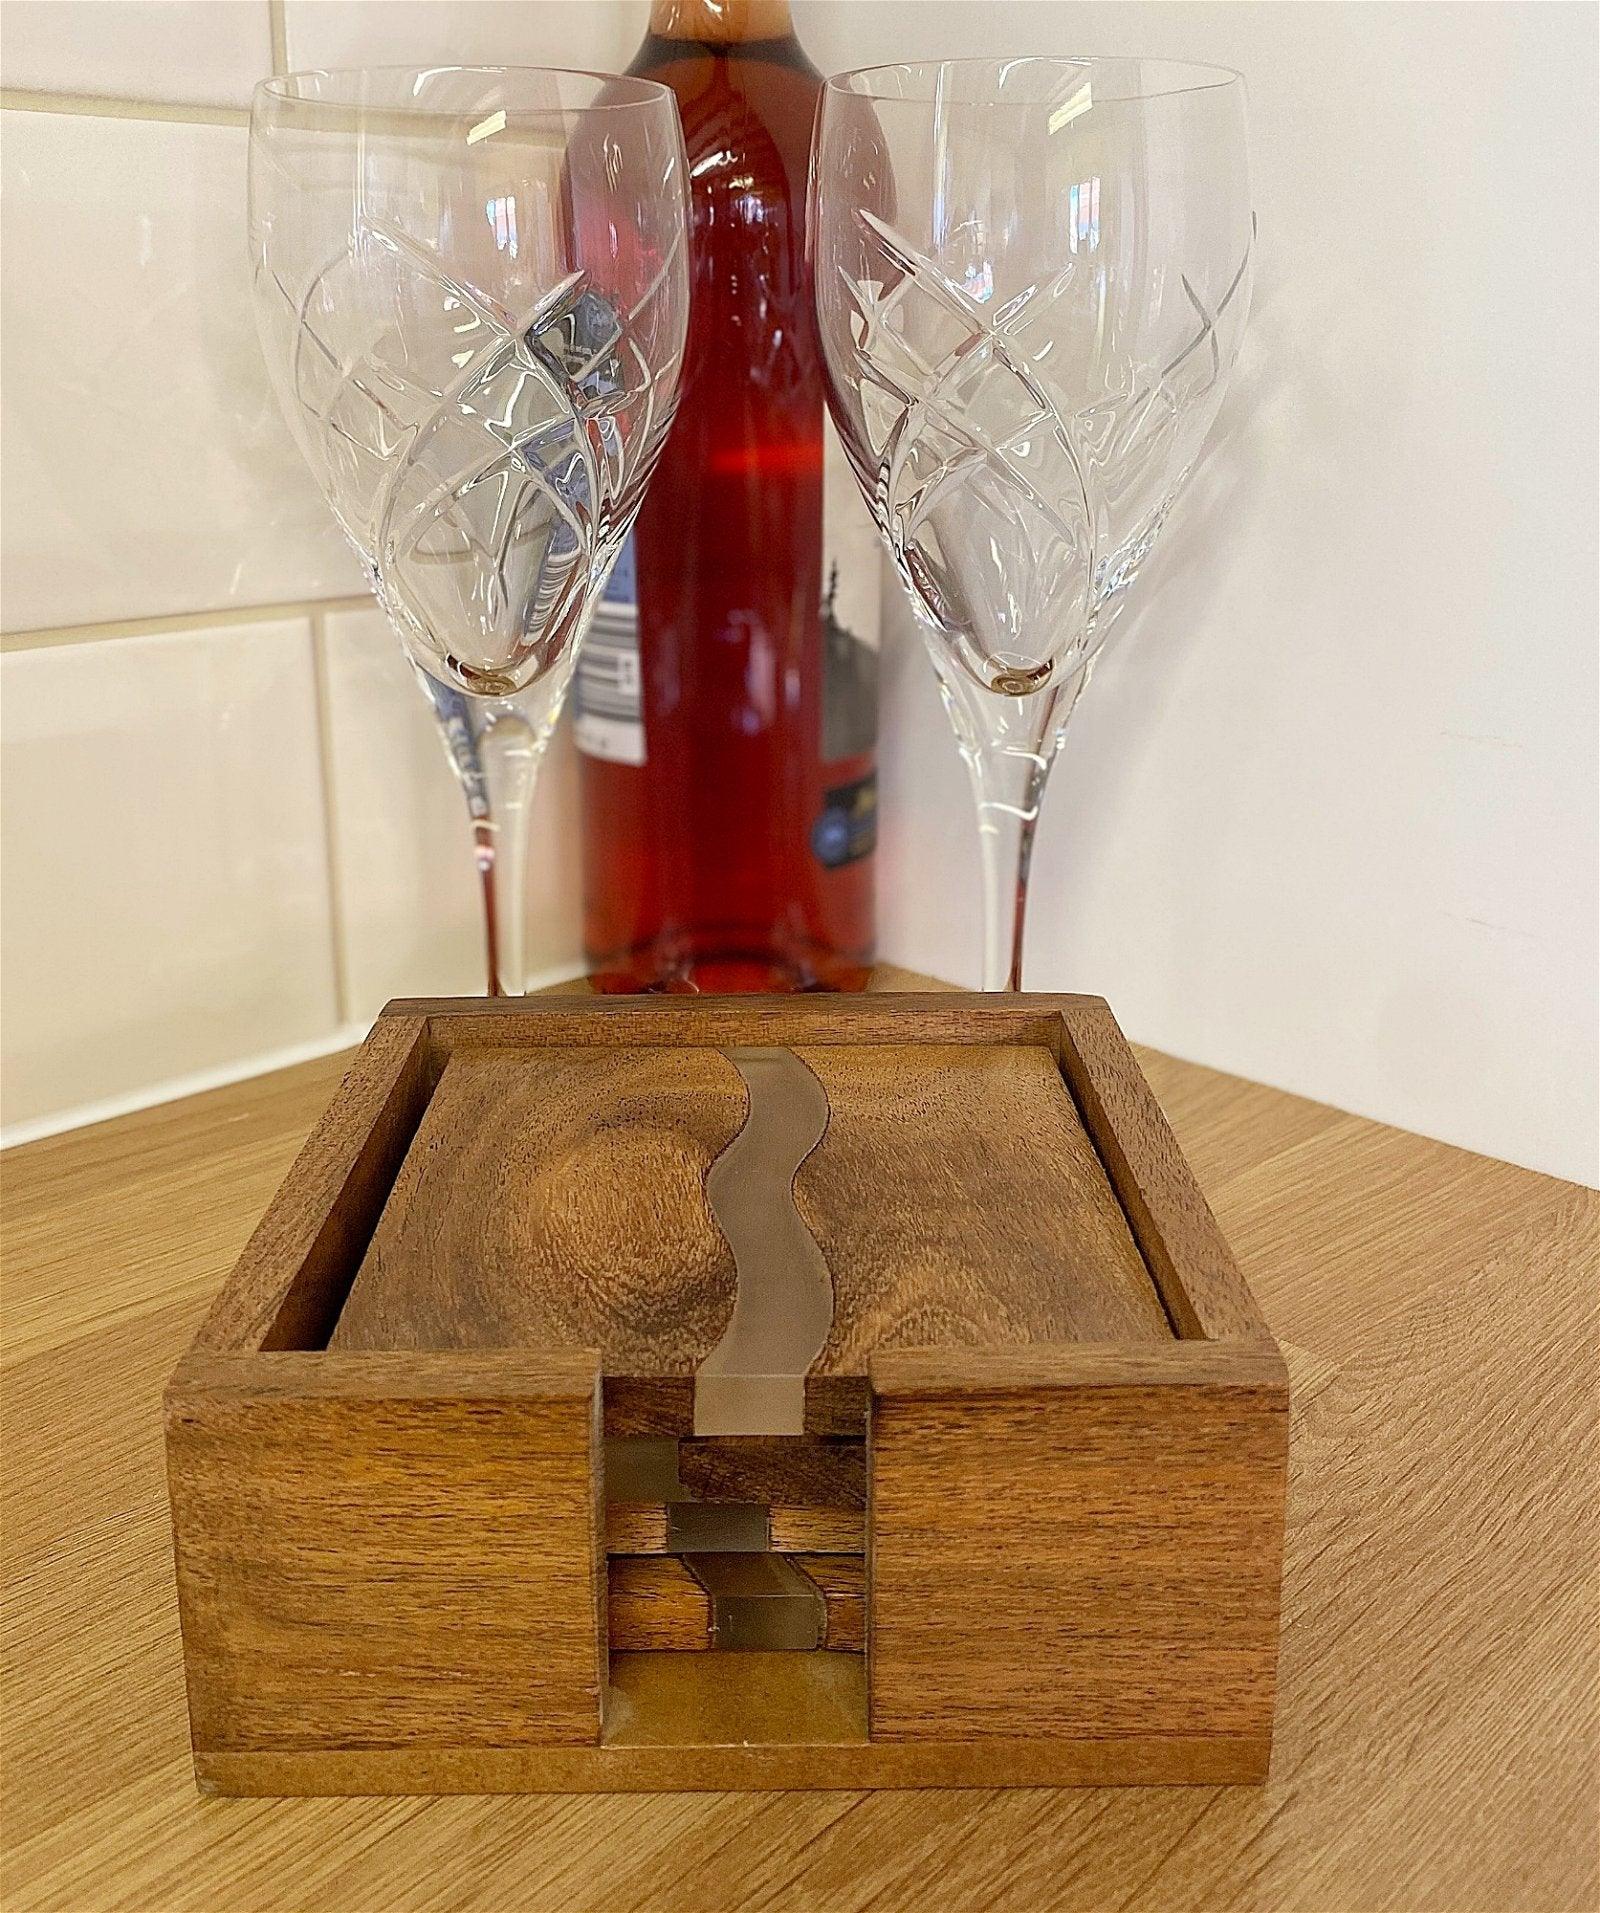 Wooden Wave Design Coasters In A Wooden Holder - £24.99 - Coasters & Placemats 